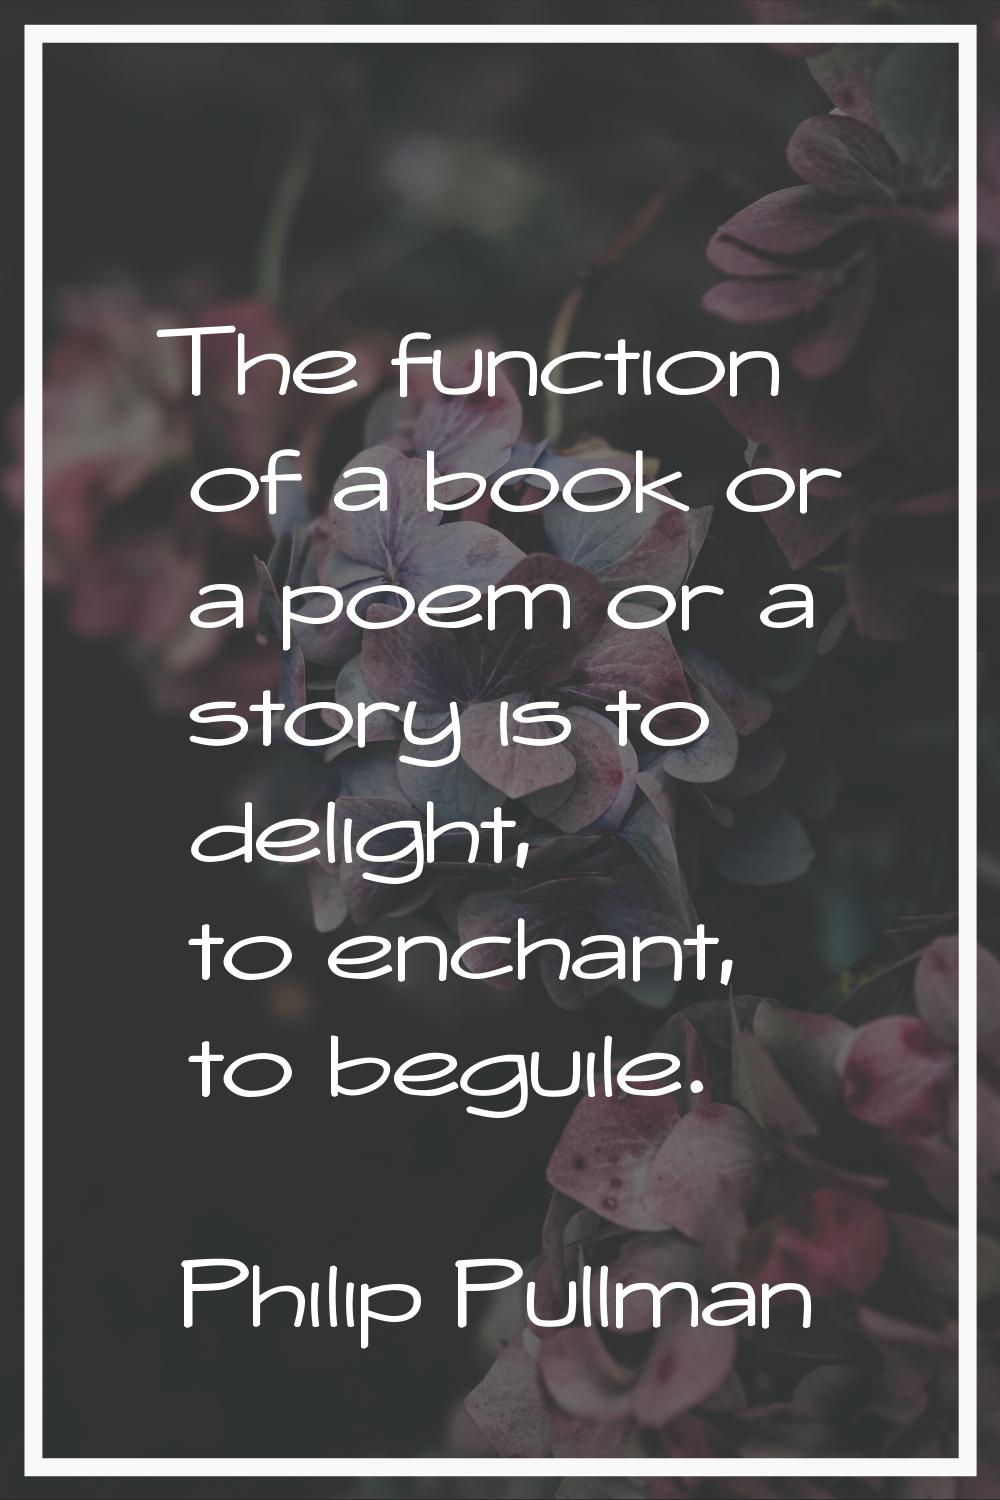 The function of a book or a poem or a story is to delight, to enchant, to beguile.